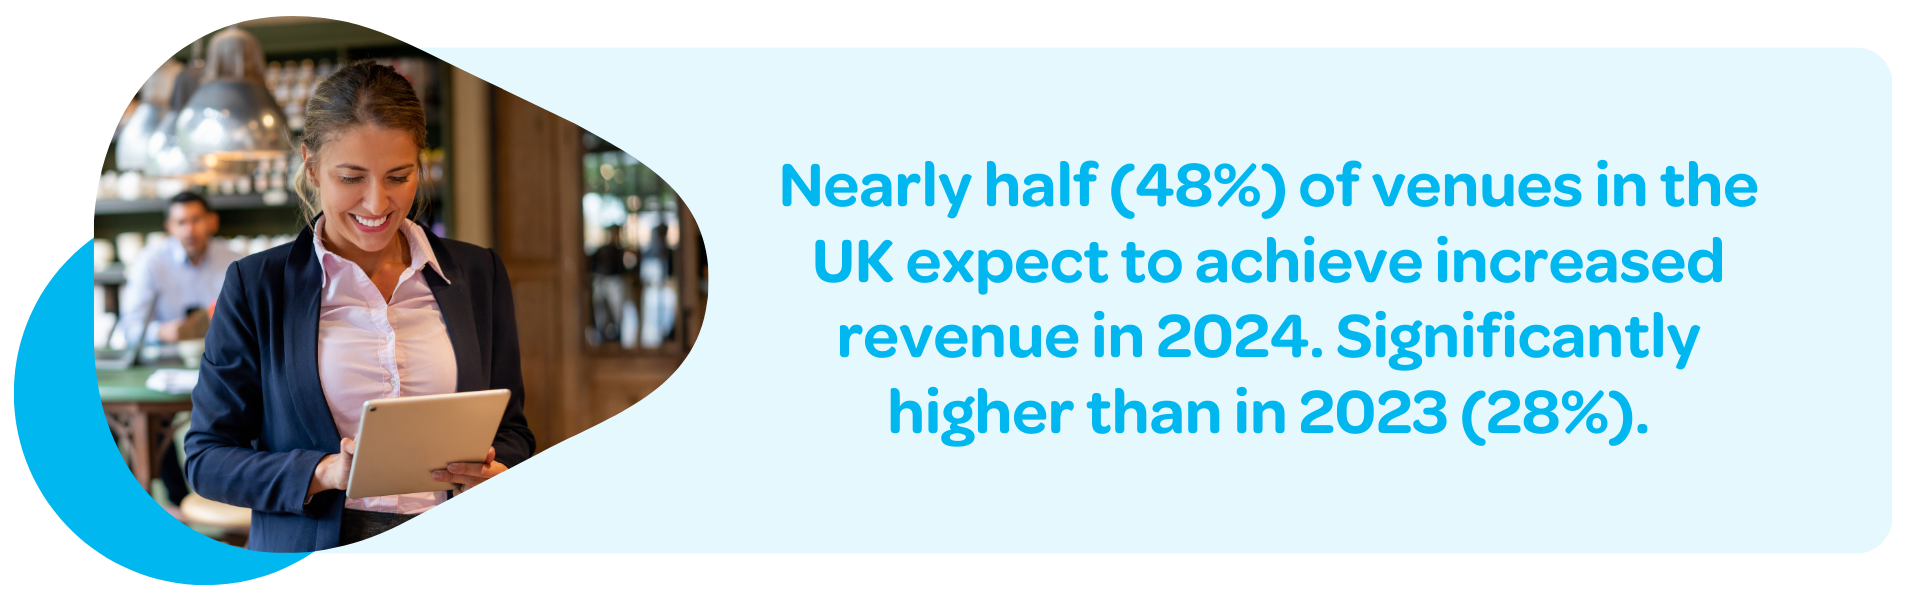 Nearly half (48%) of venues in the UK expect to achieve increased revenue in 2024. Significantly higher than in 2023 (28%).